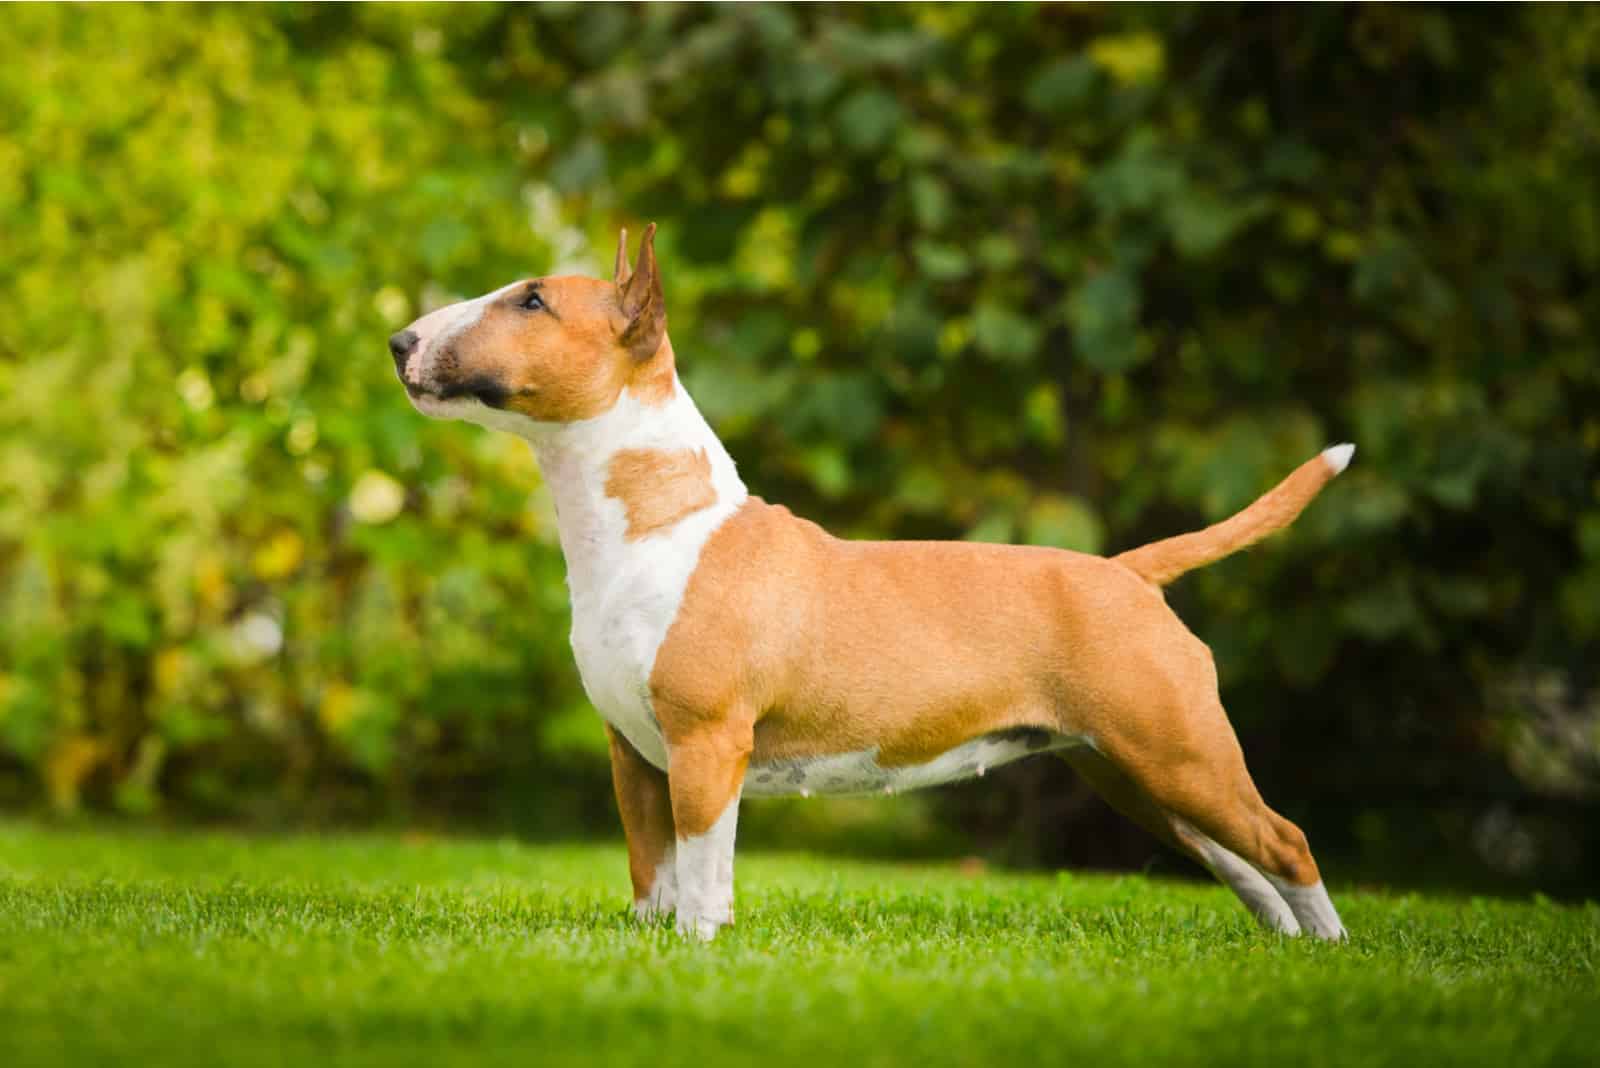 Bull Terrier is standing on the grass